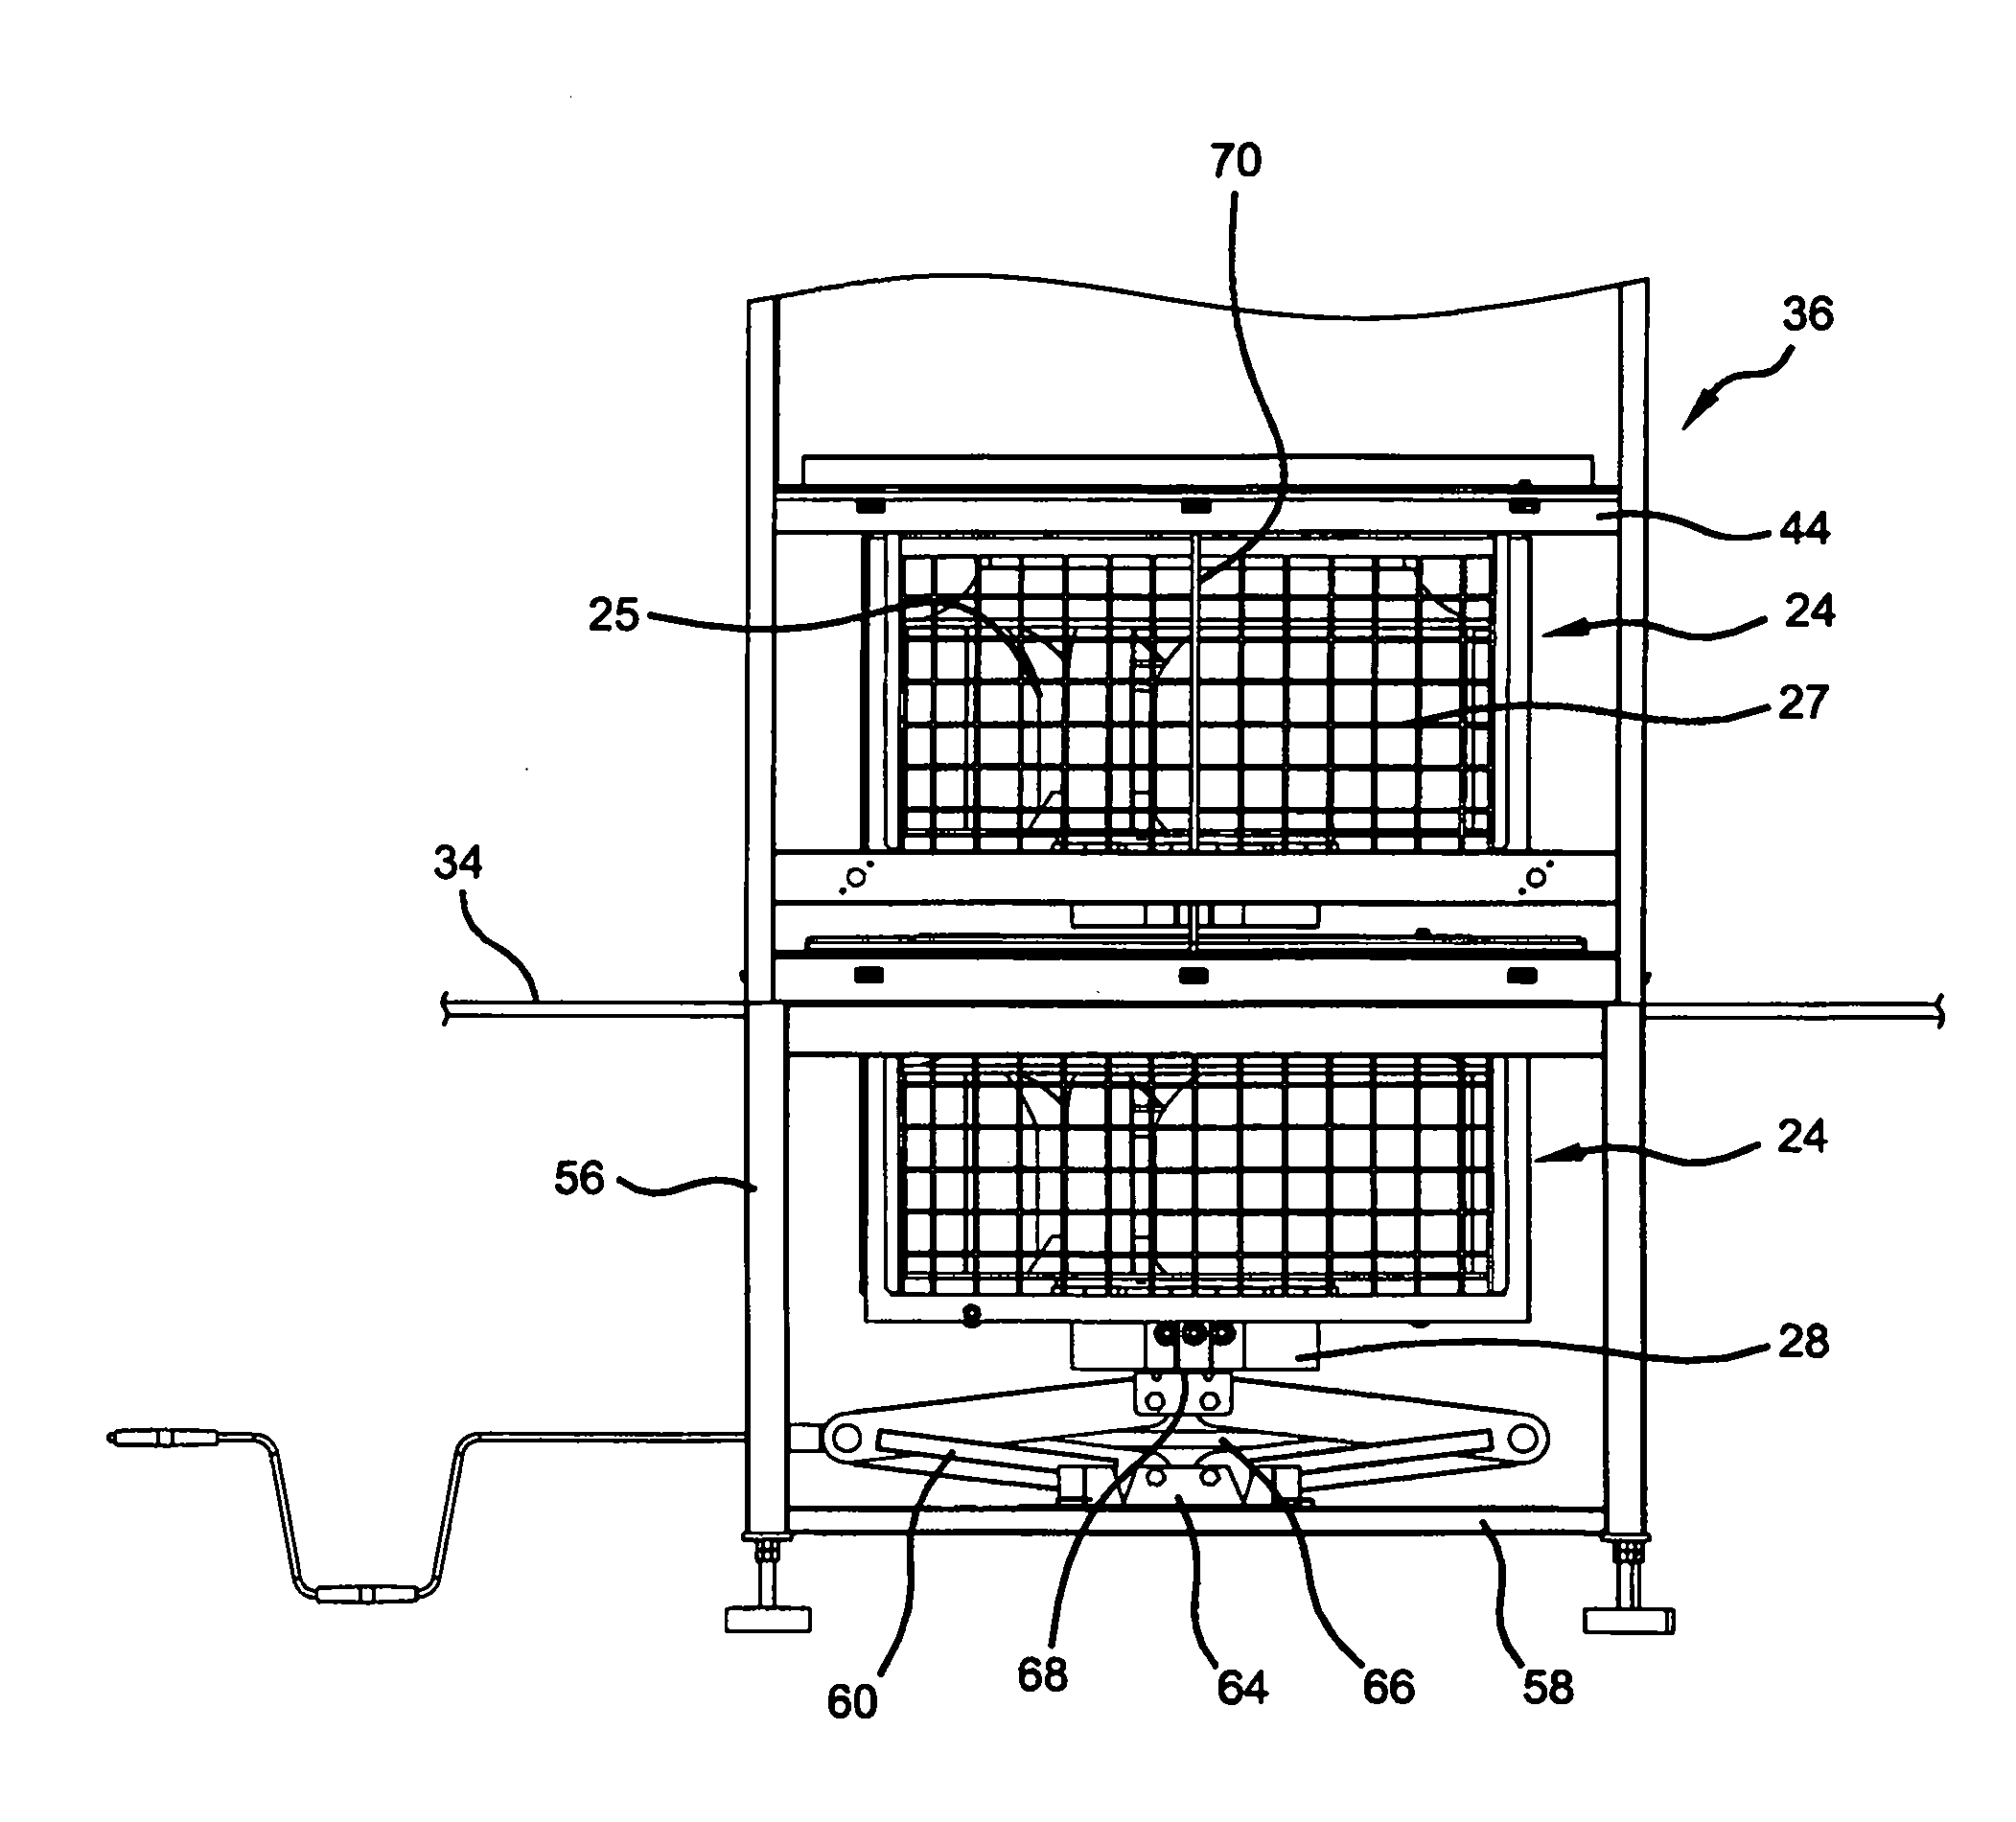 Computer room environmental conditioning unit with translatable blowers